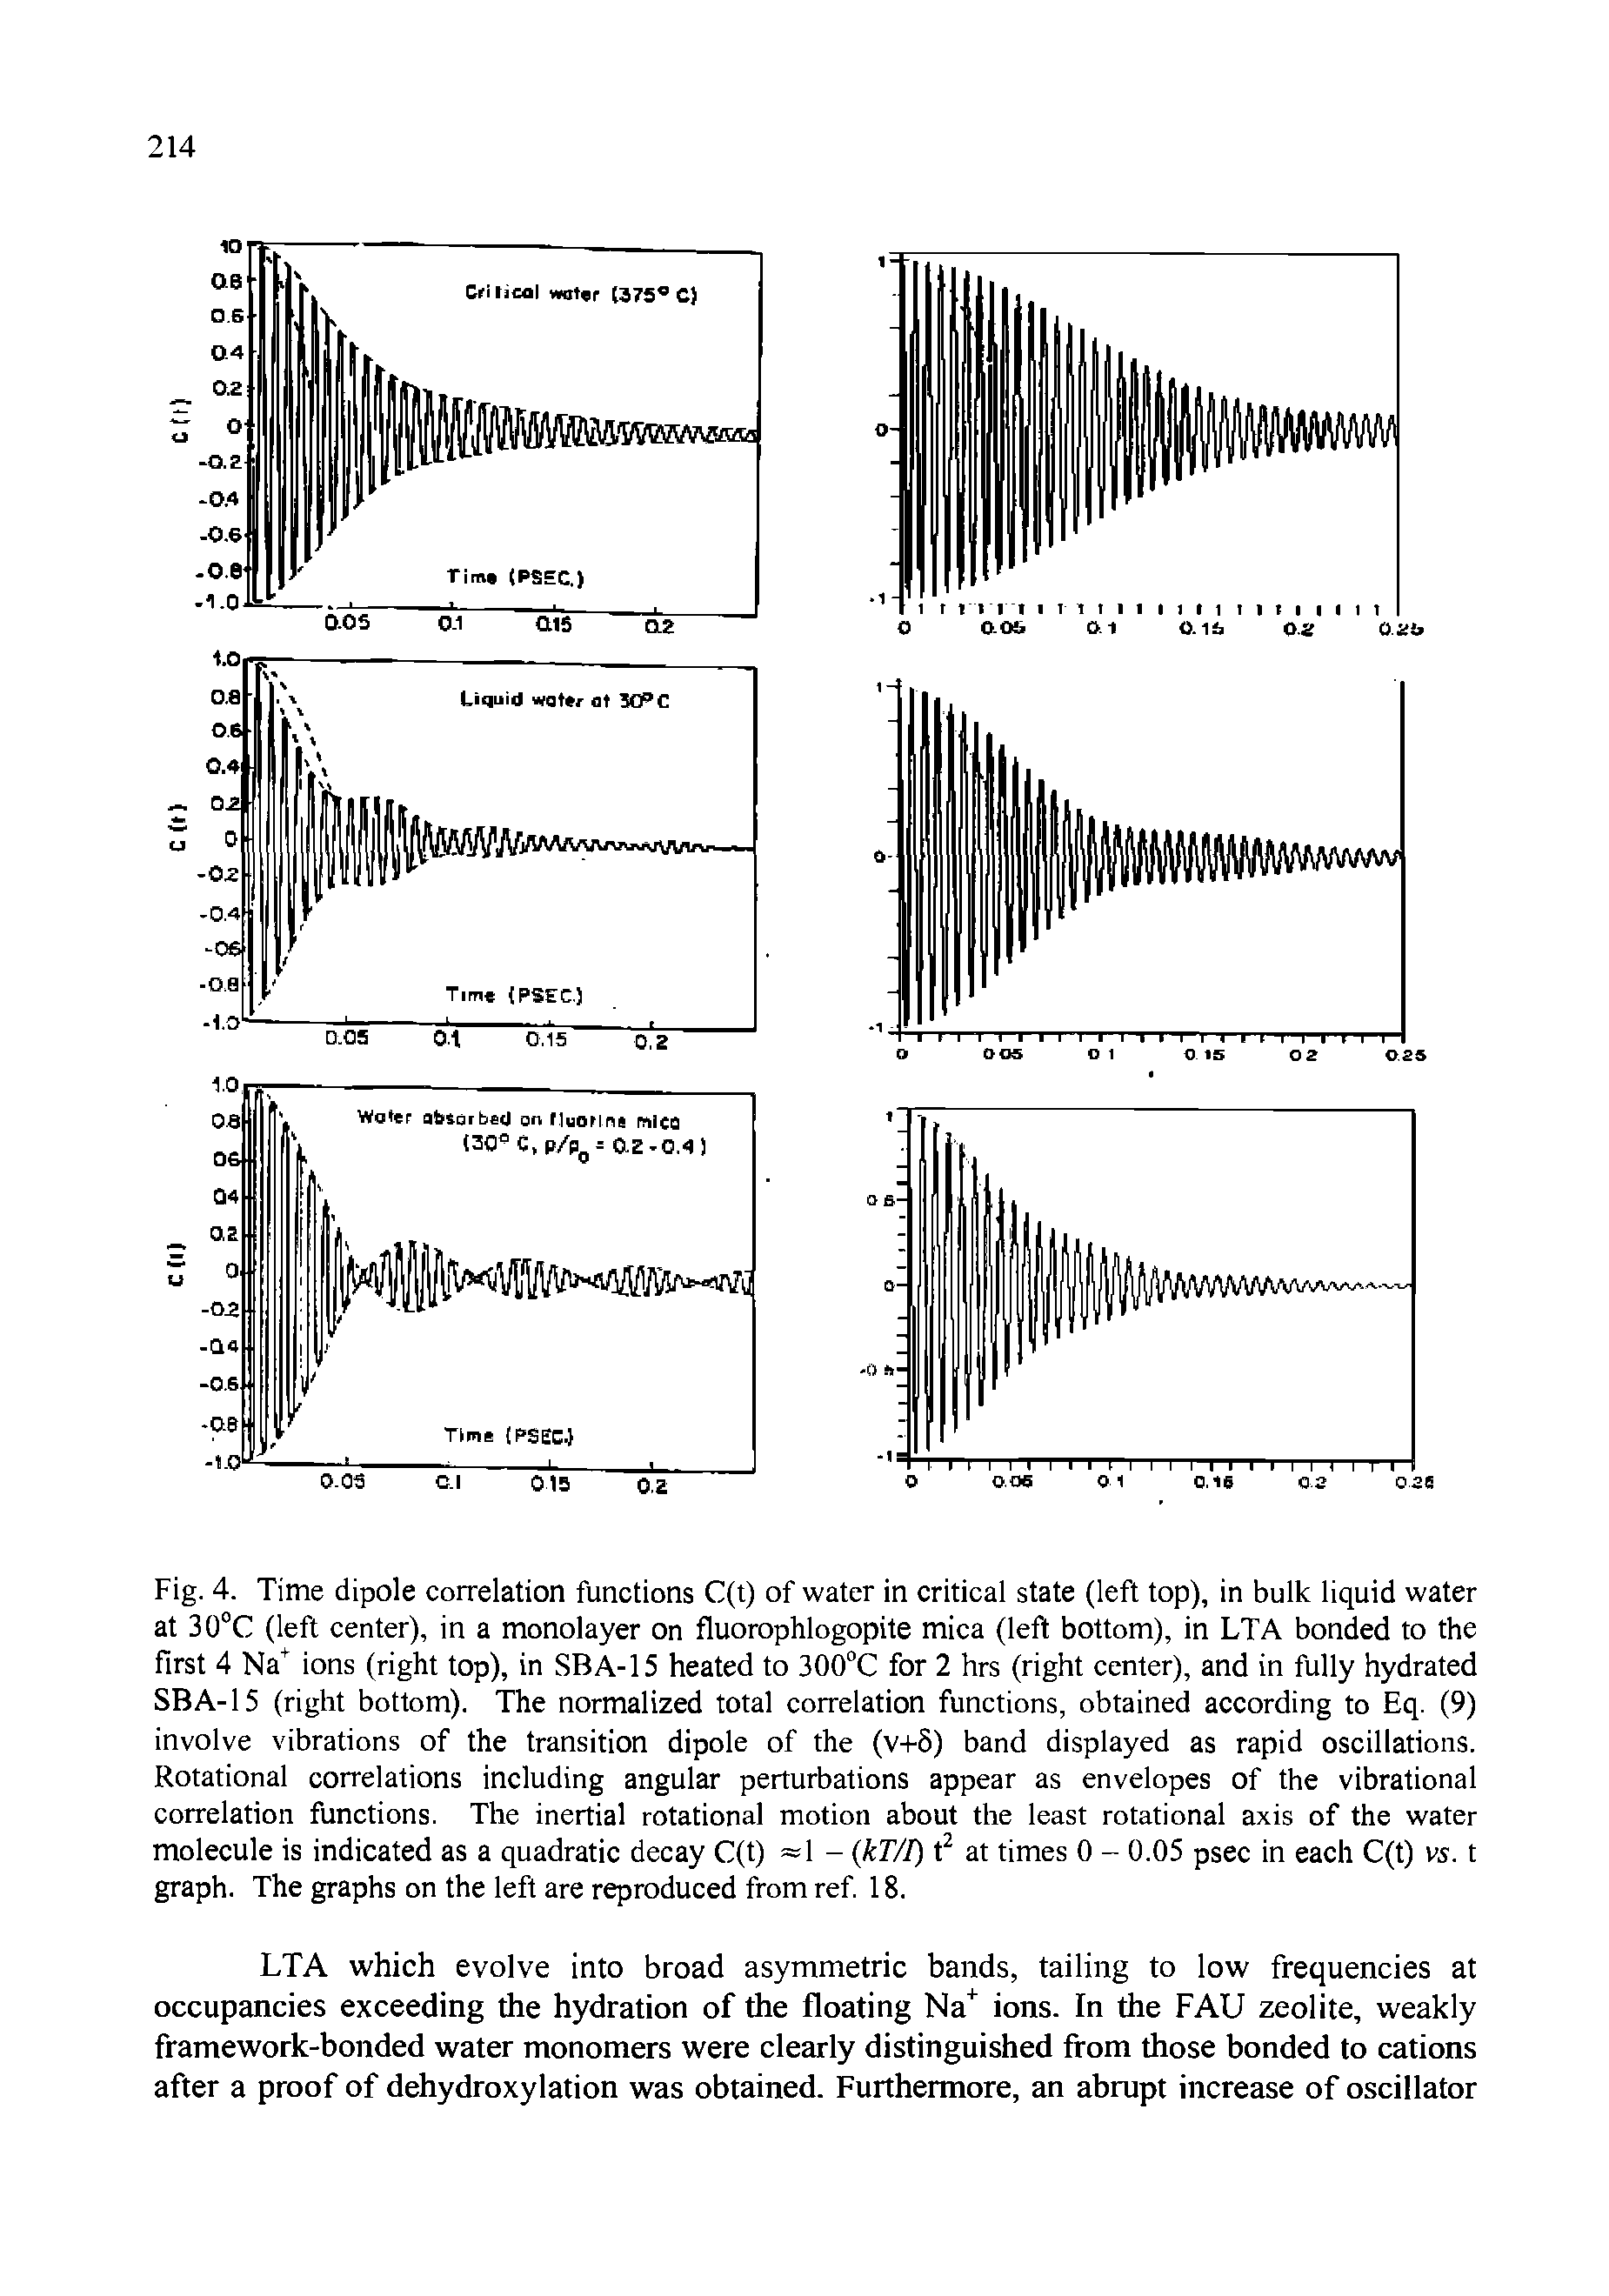 Fig. 4. Time dipole correlation functions C(t) of water in critical state (left top), in bulk liquid water at 30°C (left center), in a monolayer on fluorophlogopite mica (left bottom), in LTA bonded to the first 4 Na+ ions (right top), in SB A-15 heated to 300°C for 2 hrs (right center), and in fully hydrated SBA-15 (right bottom). The normalized total correlation functions, obtained according to Eq. (9) involve vibrations of the transition dipole of the (v+5) band displayed as rapid oscillations. Rotational correlations including angular perturbations appear as envelopes of the vibrational correlation functions. The inertial rotational motion about the least rotational axis of the water molecule is indicated as a quadratic decay C(t) - (kT/I) t2 at times 0 - 0.05 psec in each C(t) vs. t graph. The graphs on the left are reproduced from ref. 18.